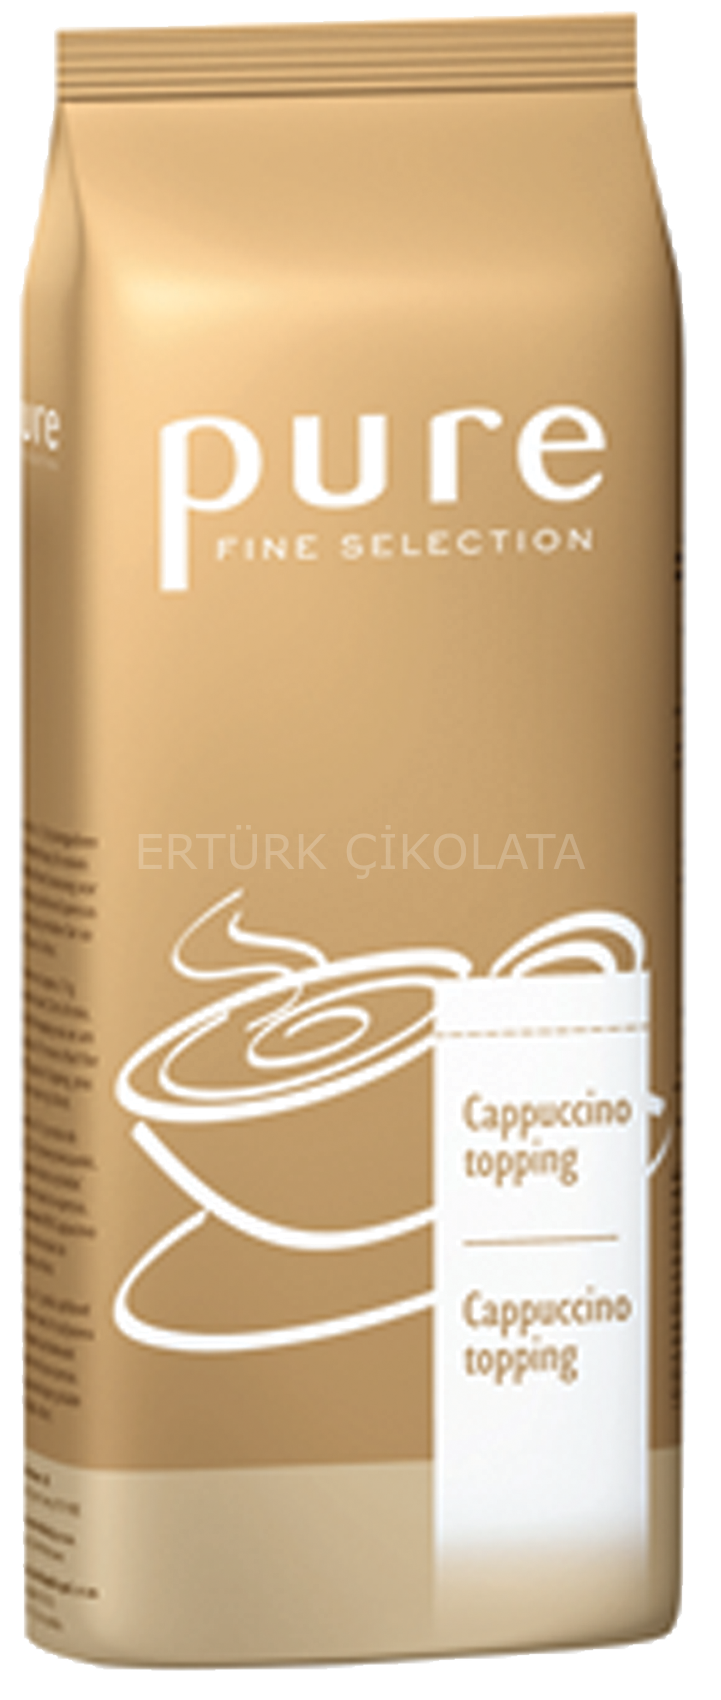 TCHİBO PURE FİNE SELECTİON CAPPUCCİNO TOPPİNG 1000 GR